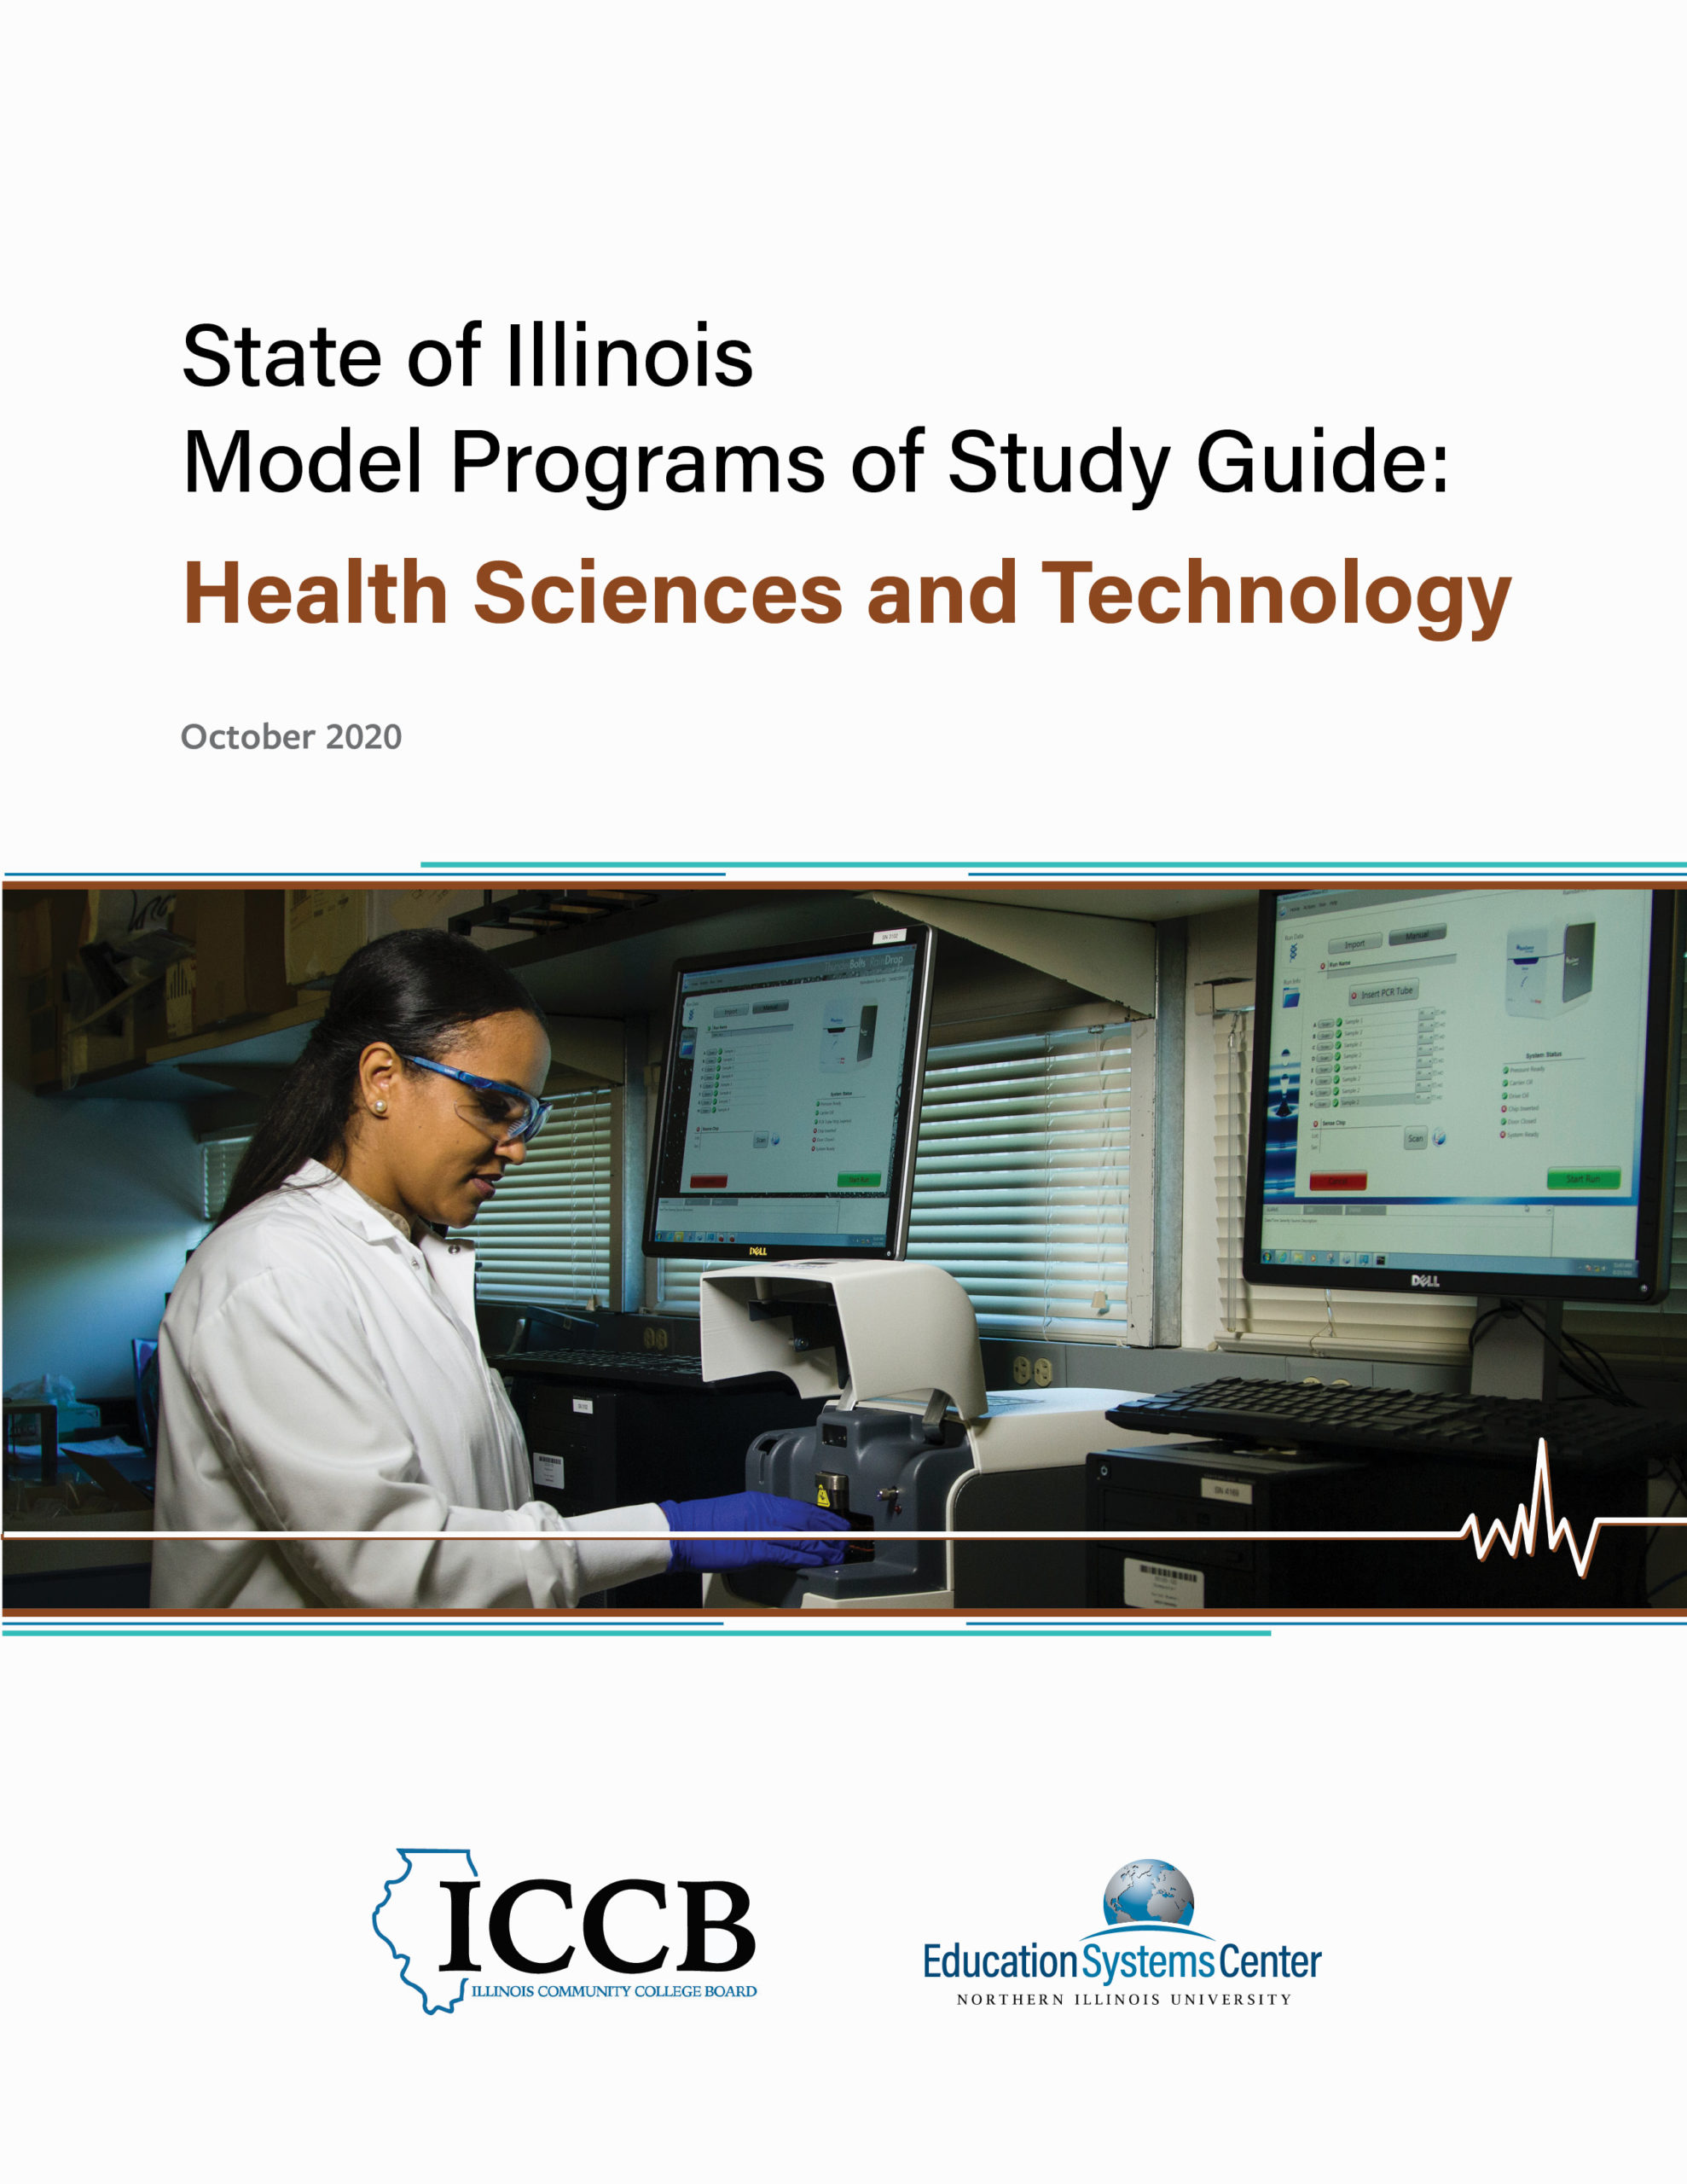 Report cover for "Model Programs of Study Guide - Health Sciences and Technology" released October 2020 by Illinois Community College Board and Education Systems Center at Northern Illinois University